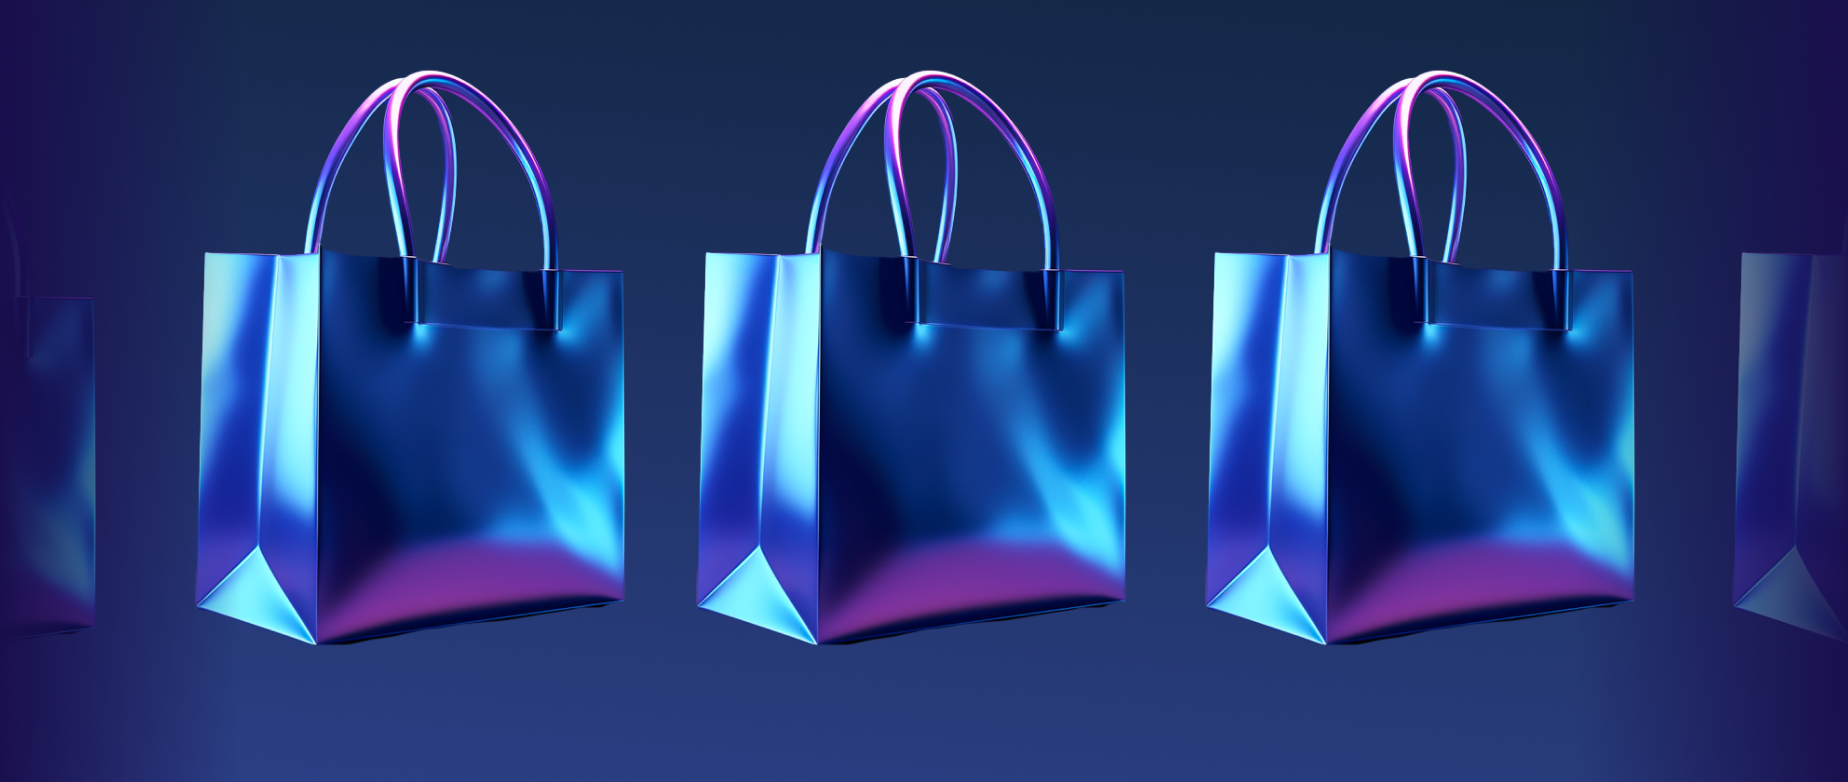 shopping bags lined up representing small business black friday shopping